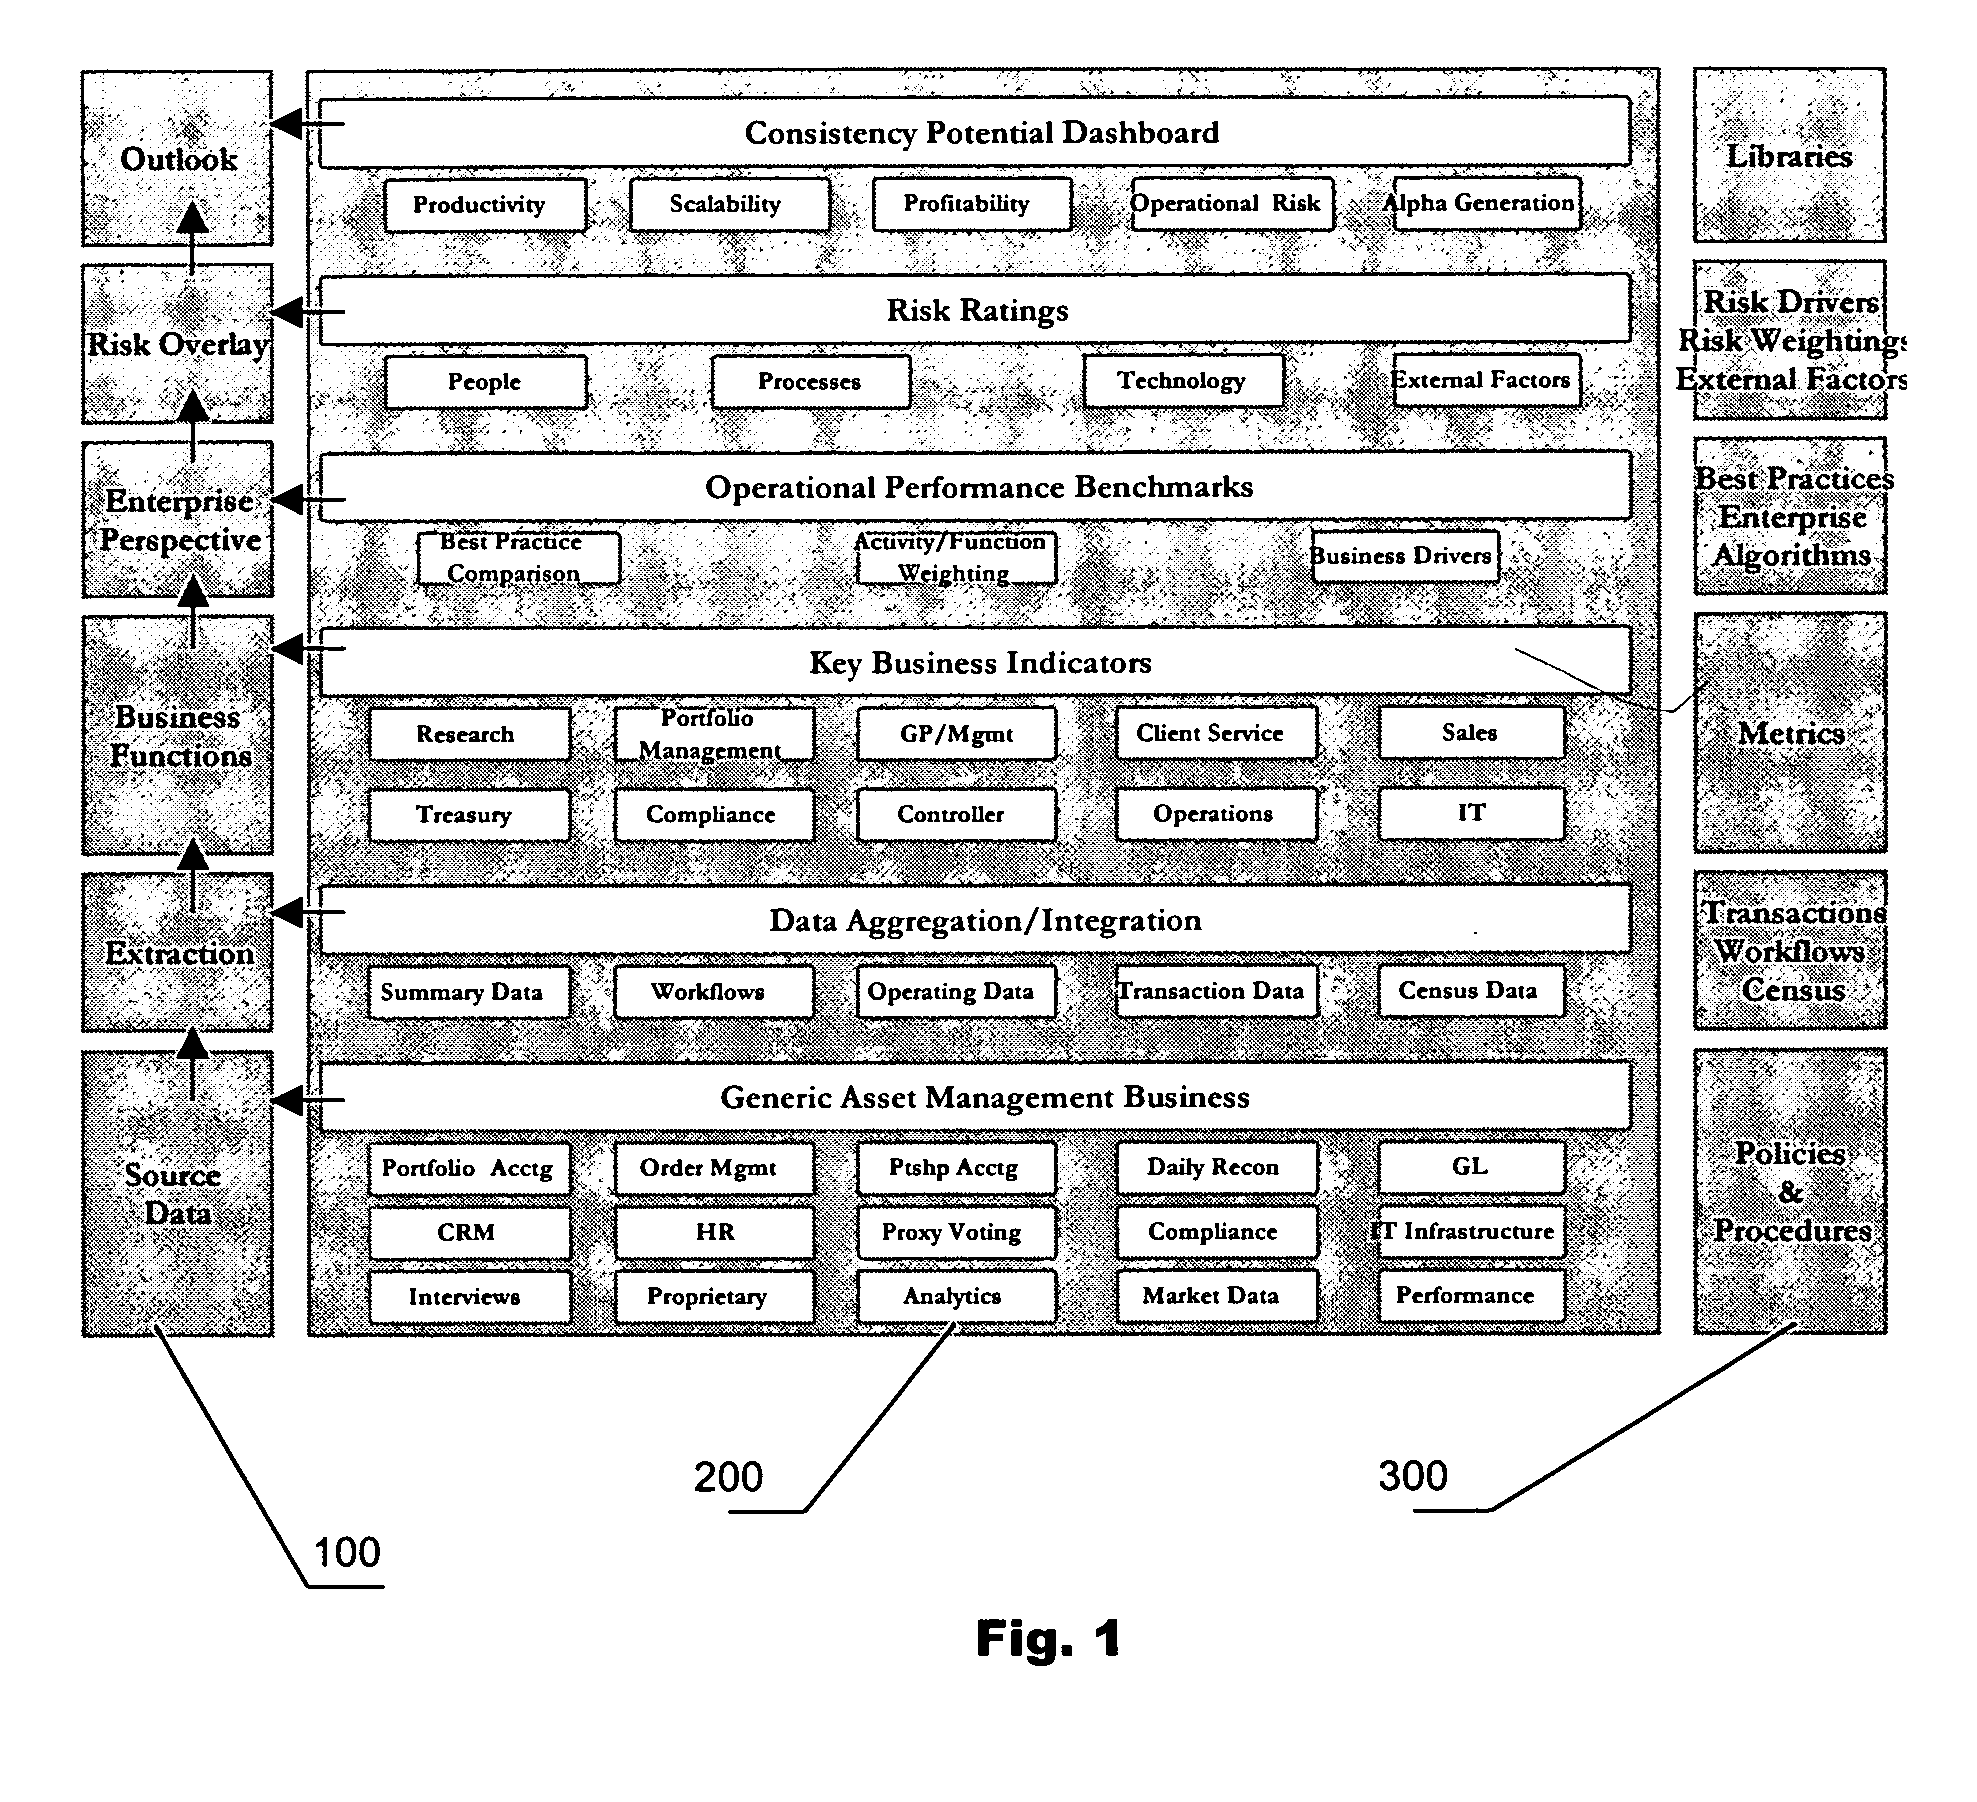 Method for evaluating a business using experiential data